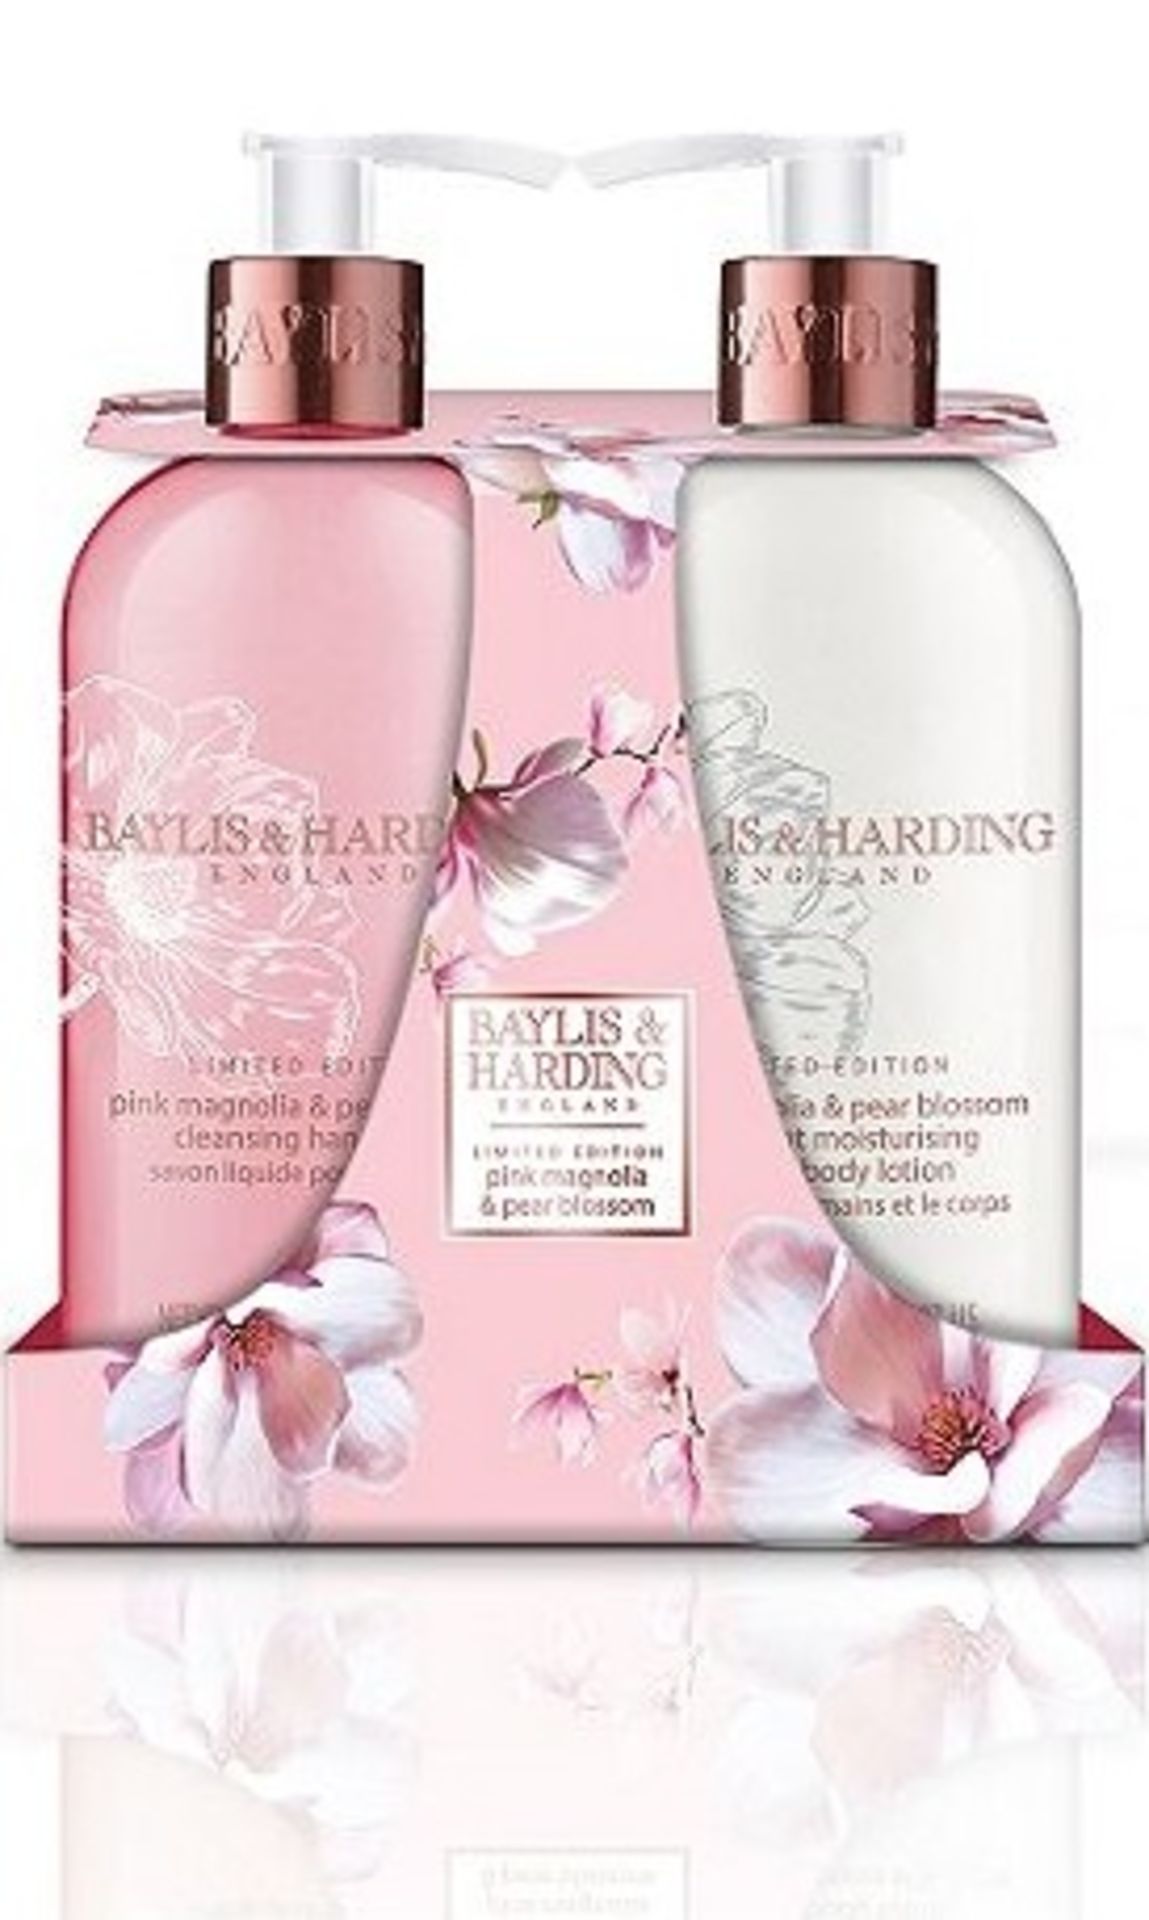 V Brand New Six Gift Sets - Baylis & Harding Limited Edition Pink Magnolia And Pear Blossom Twin - Image 2 of 2